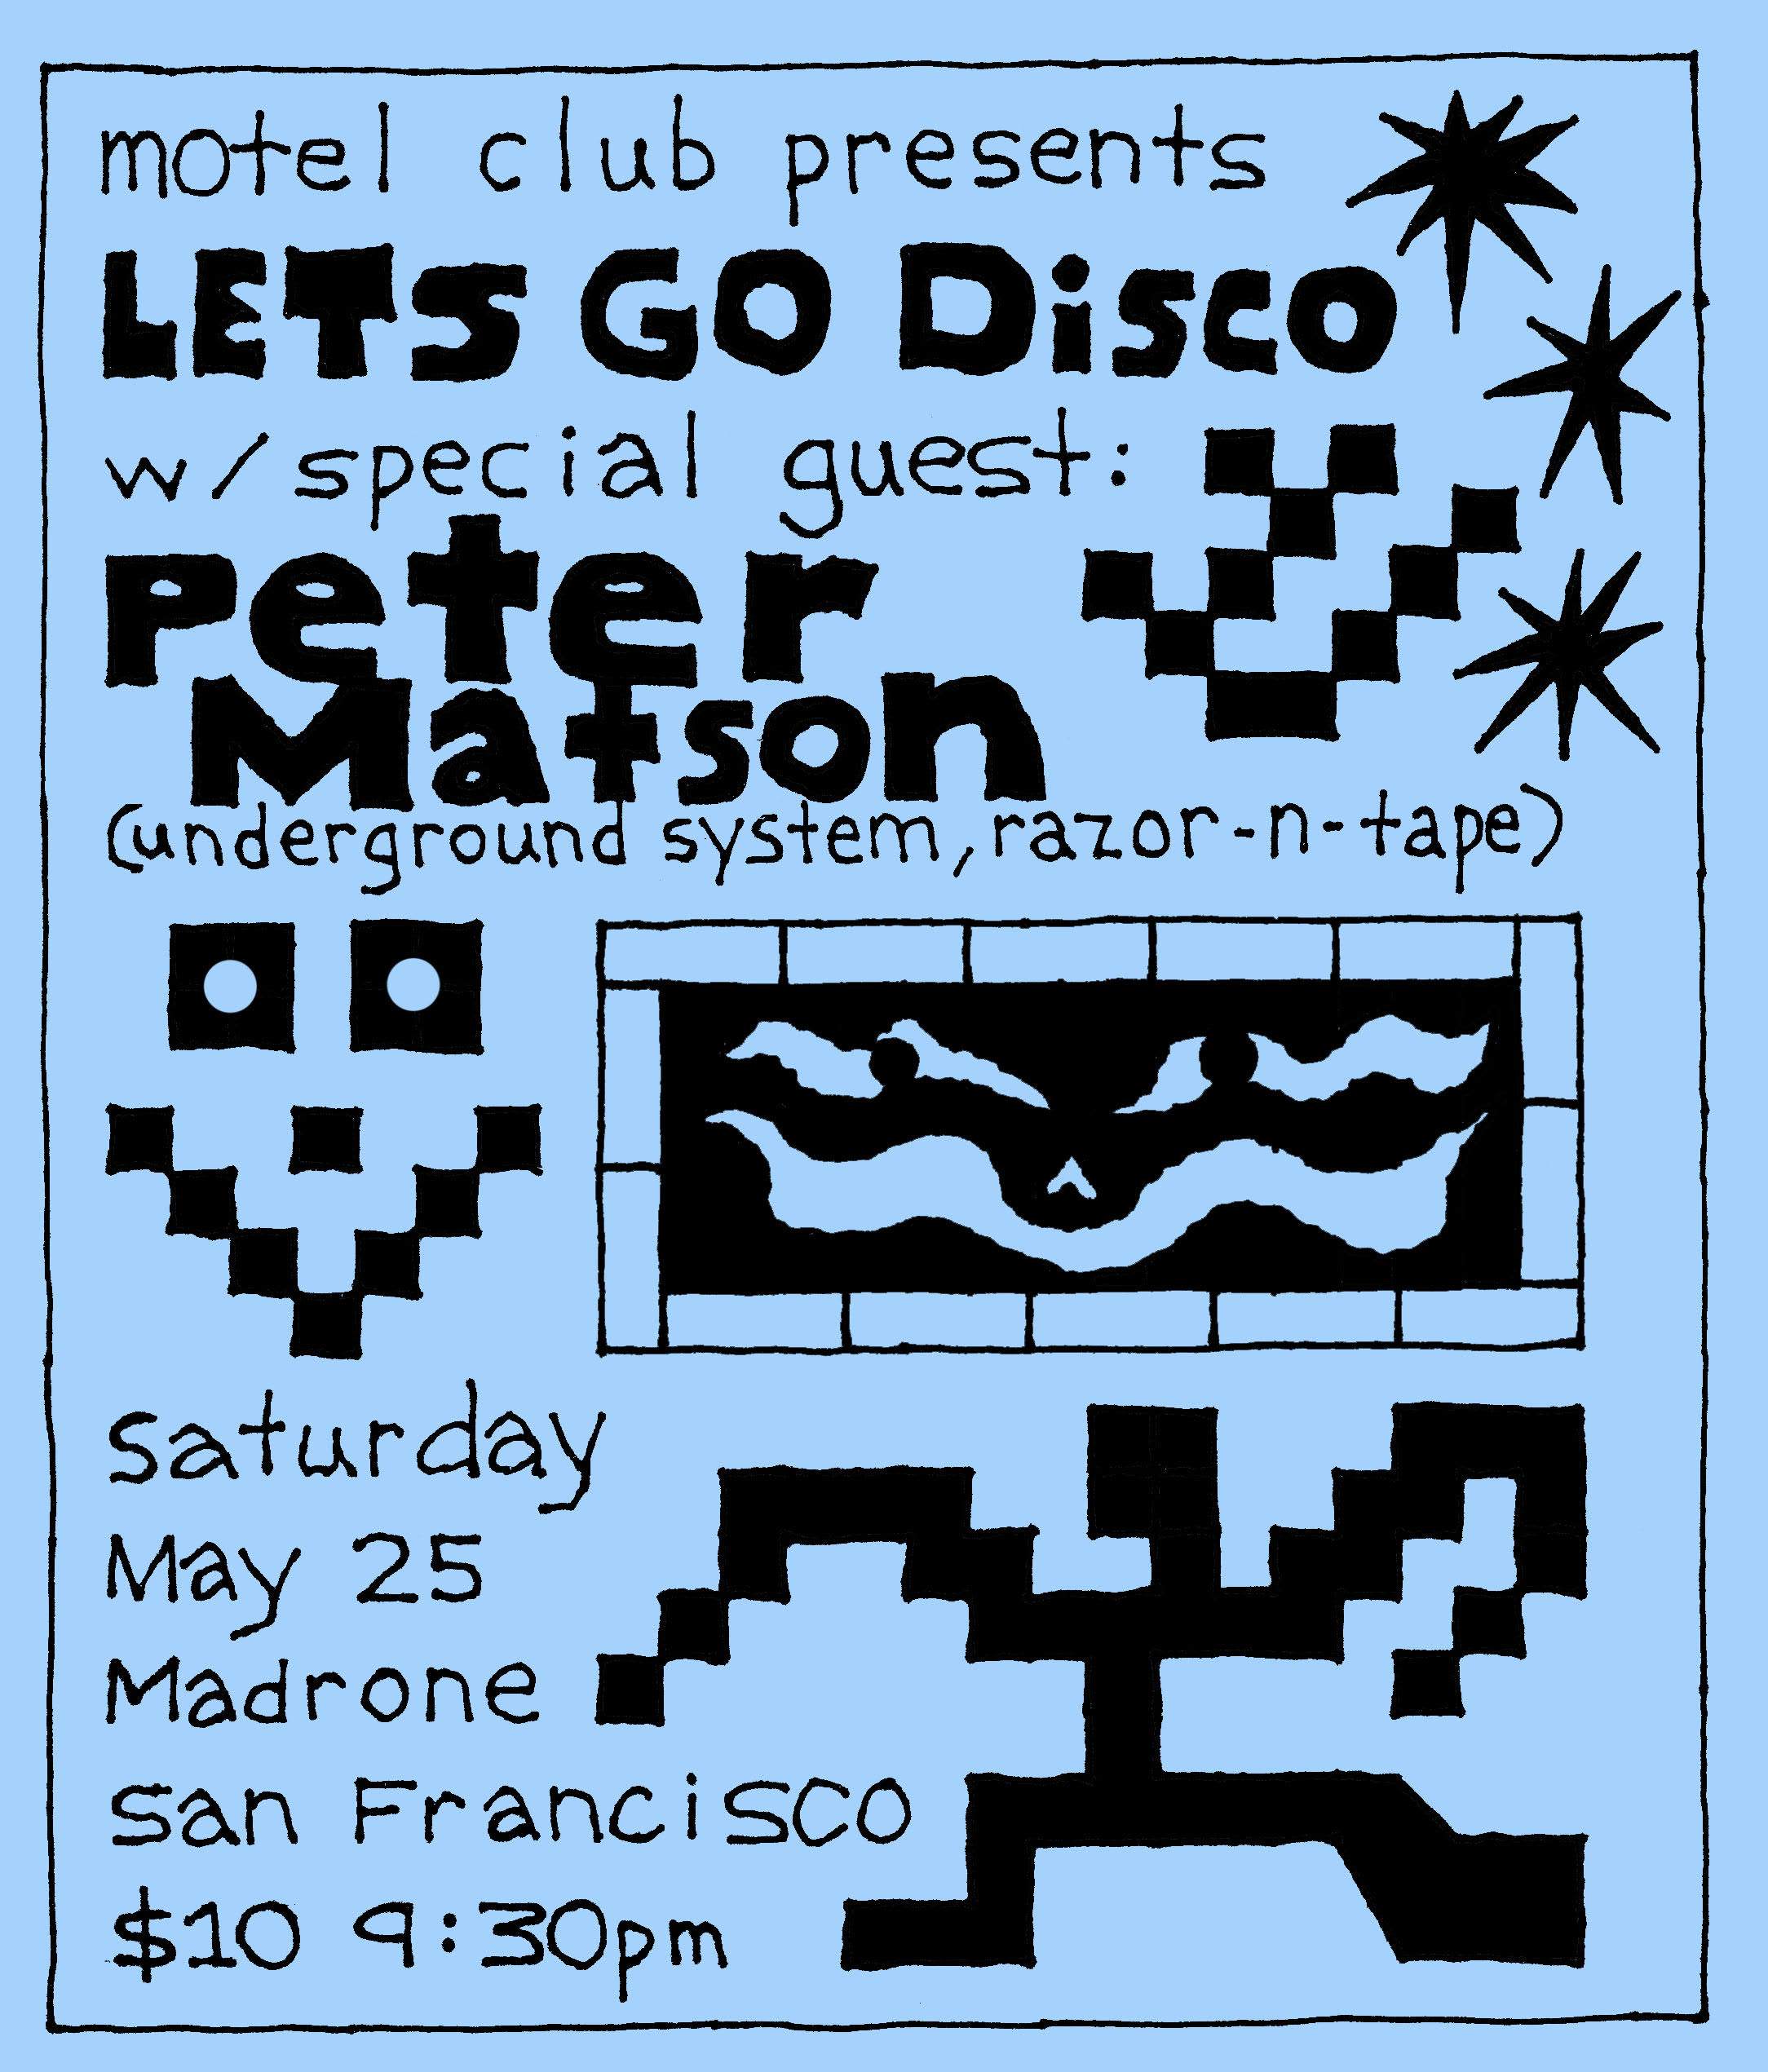 Motel Club presents Let's Go Disco with special guest Peter Matson - フライヤー裏